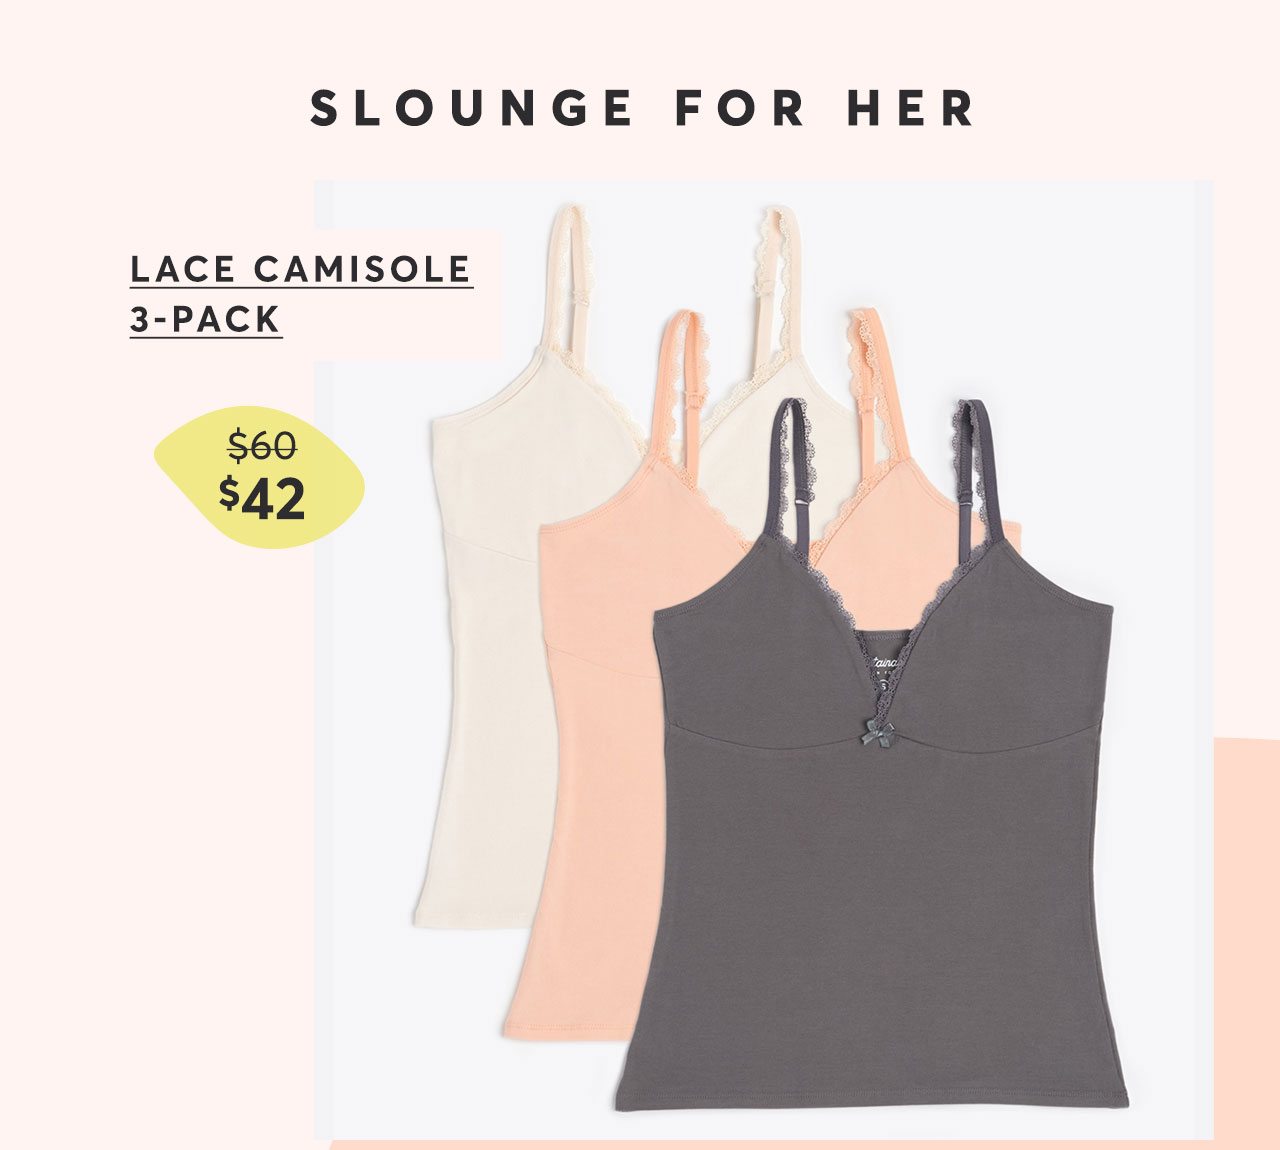 Slounge for Her: Lace Camisole 3-Pack $42